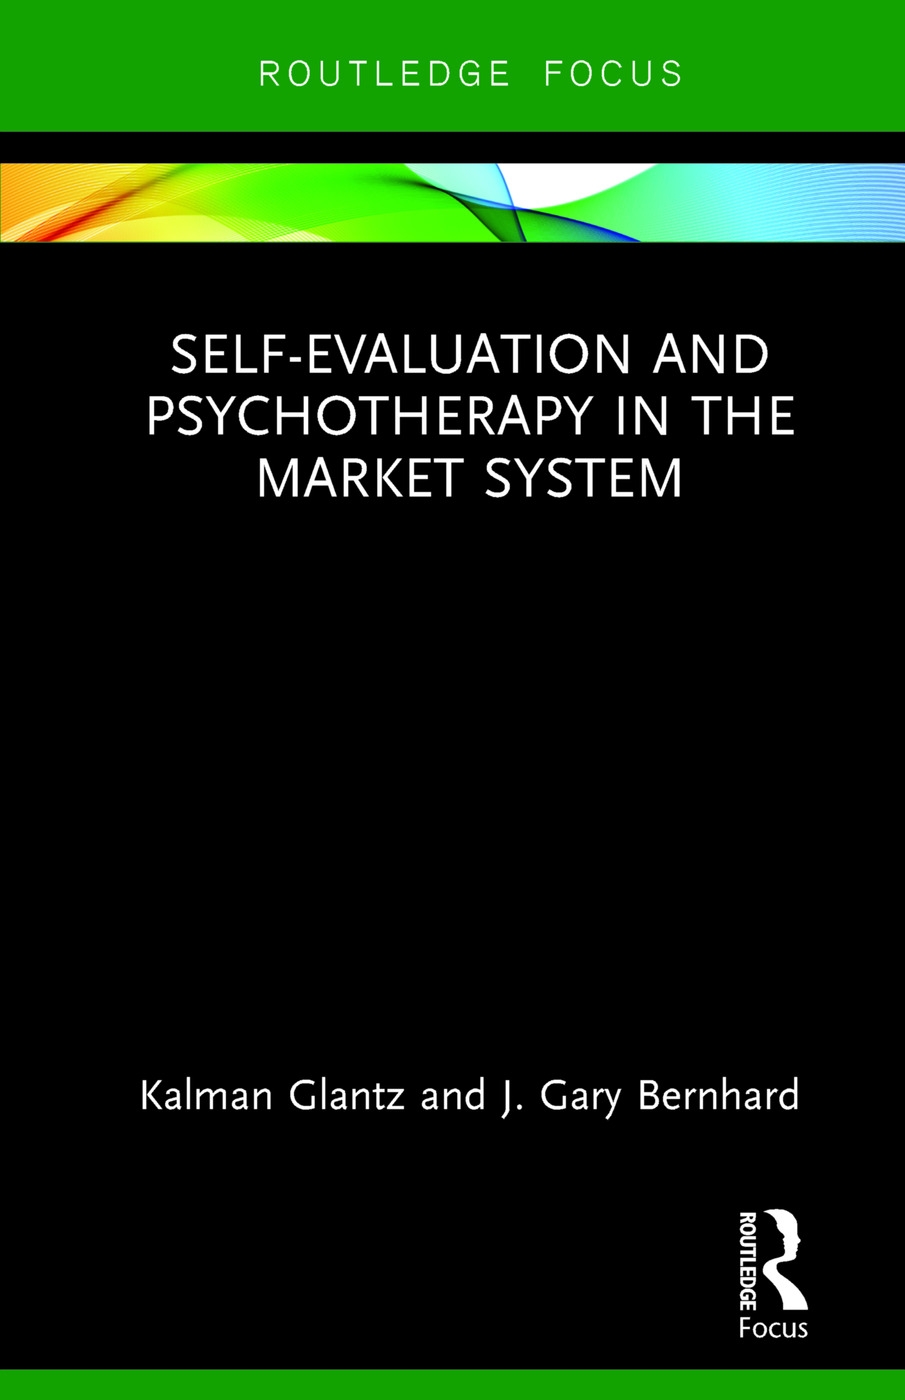 Self-Evaluation and Psychotherapy in the Market System